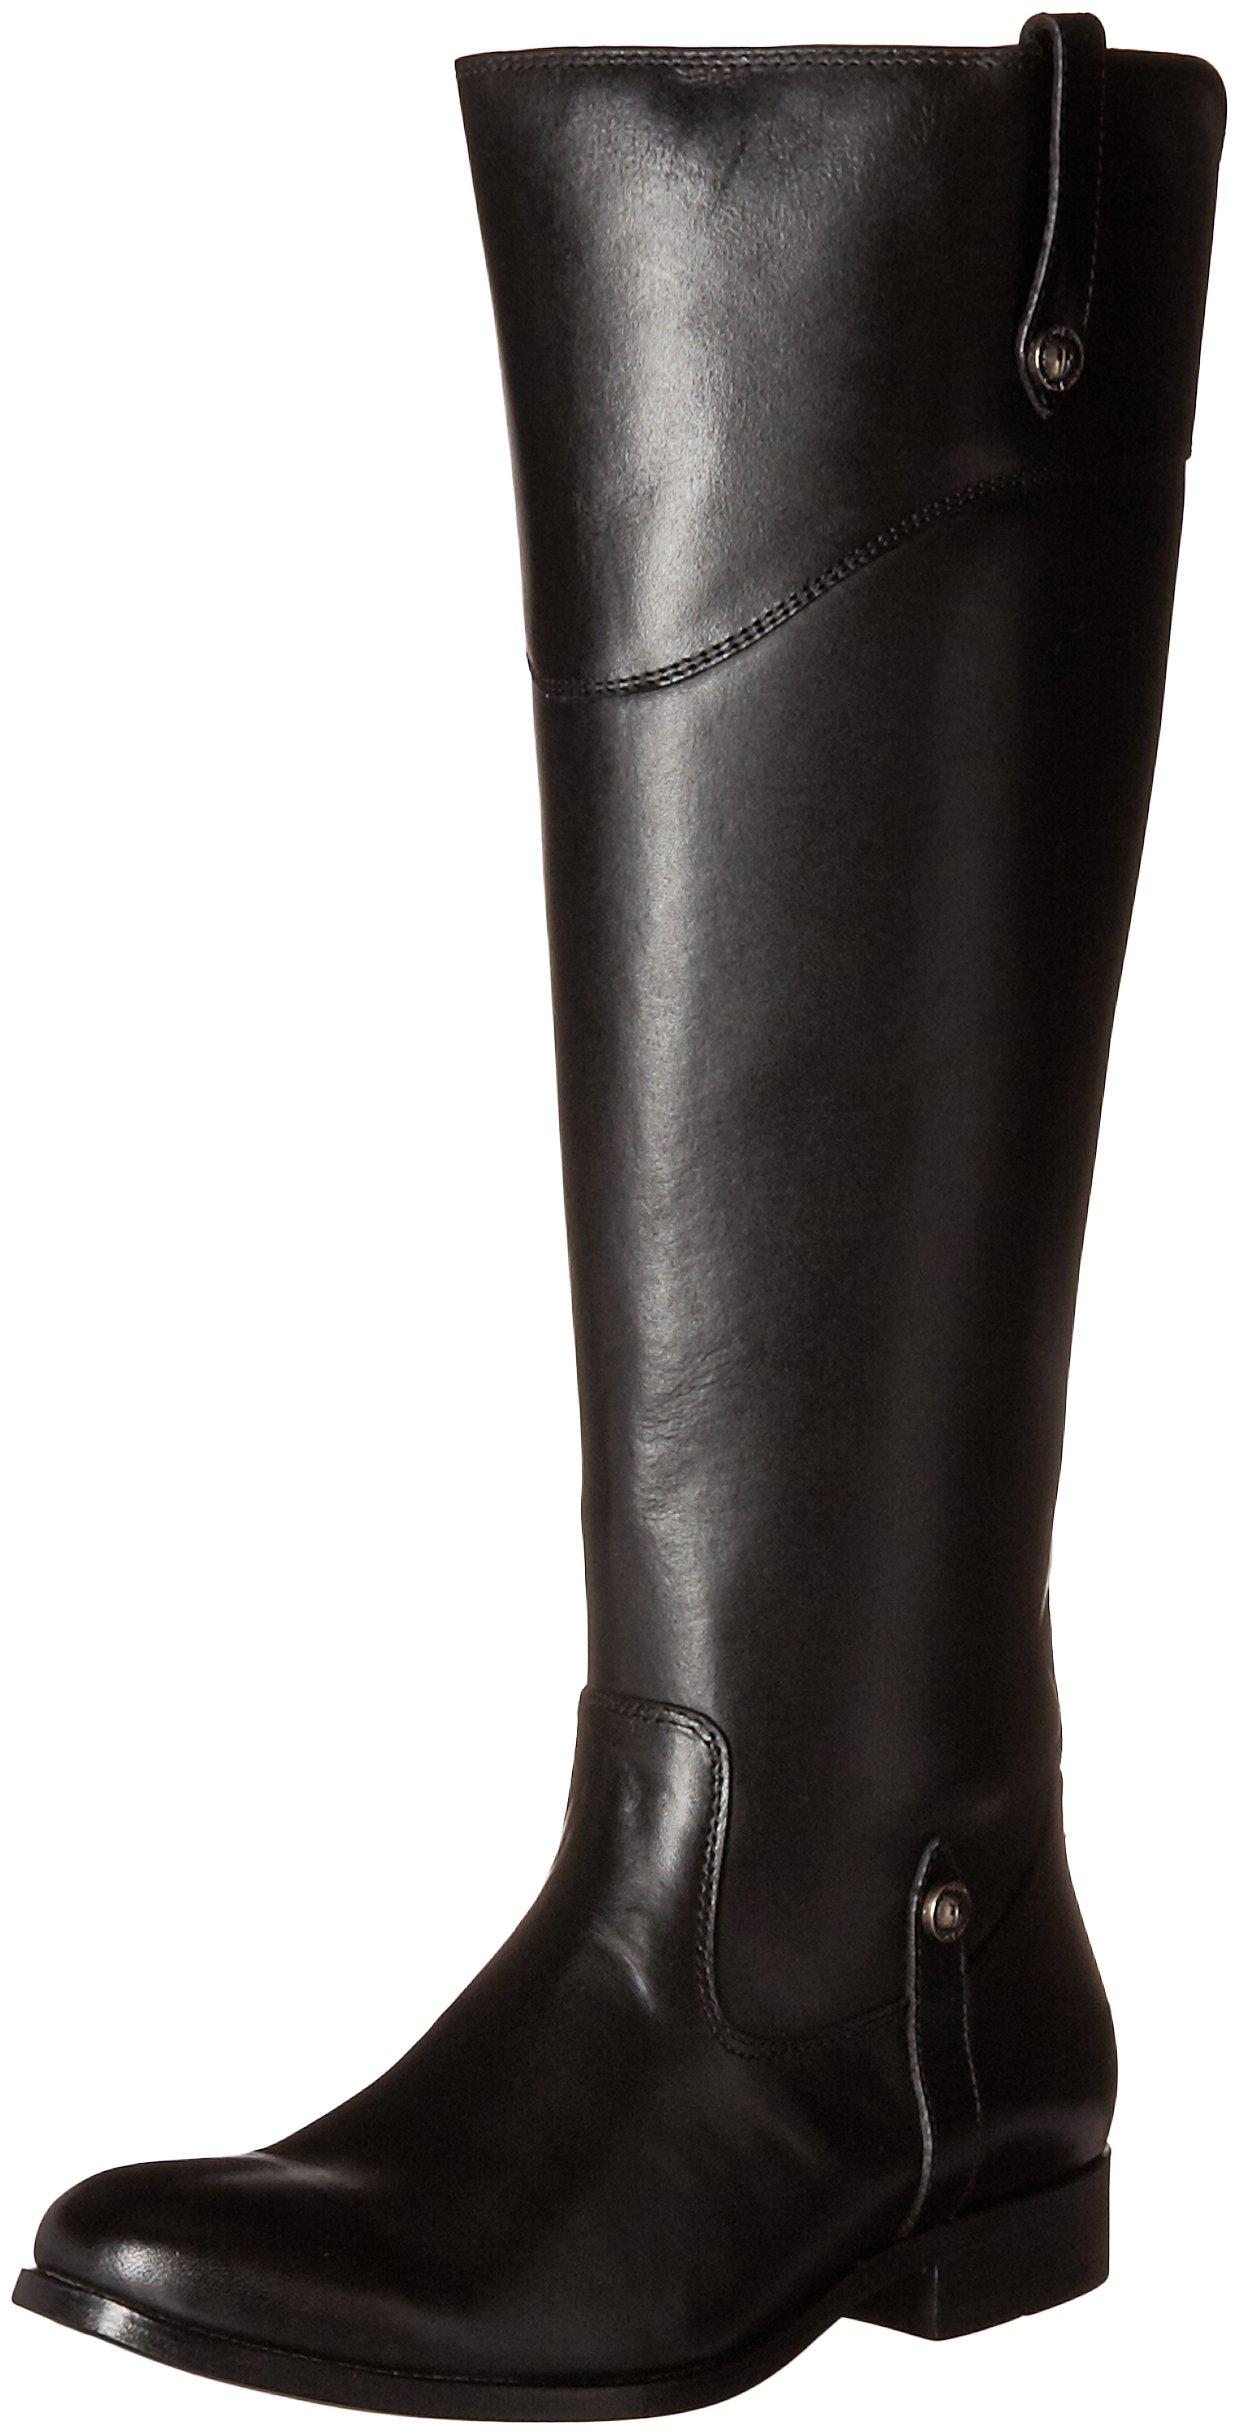 Frye Melissa Tab Tall Riding Boot in Black - Save 37% - Lyst